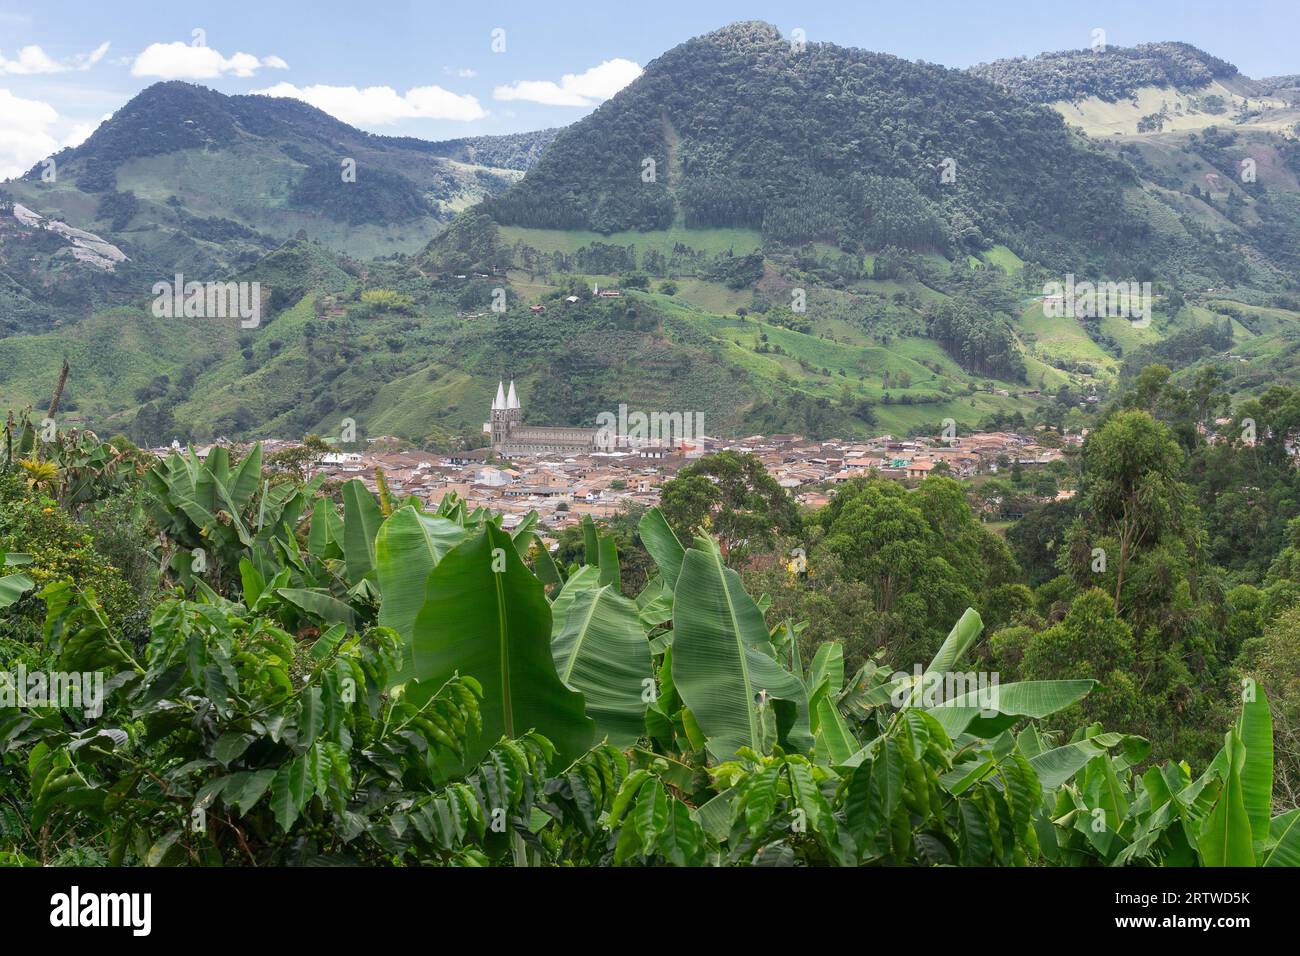 Village of Jardin is situated in a valley in the mountainous region of Antioquia, Colombia Stock Photo